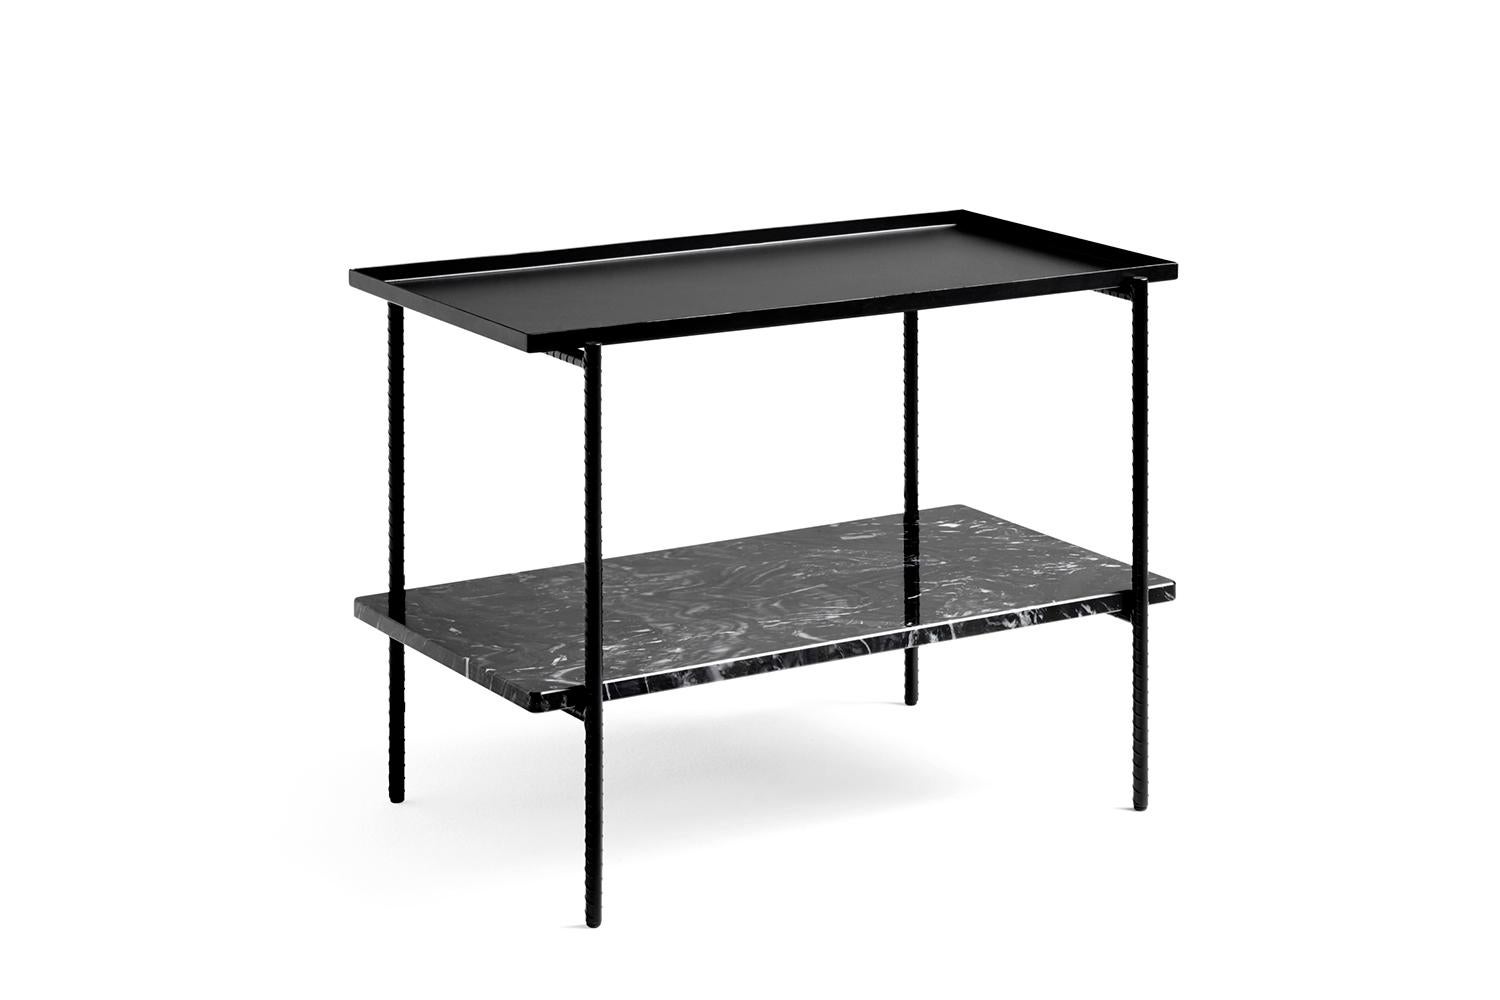 Sylvain Willenz’s Rebar tray table having a design that juxtaposes the reinforced steel bar frame with black marble tops and metal trays to create a balanced aesthetic. The table is suitable for using in private, corporate or public spaces.
Size :